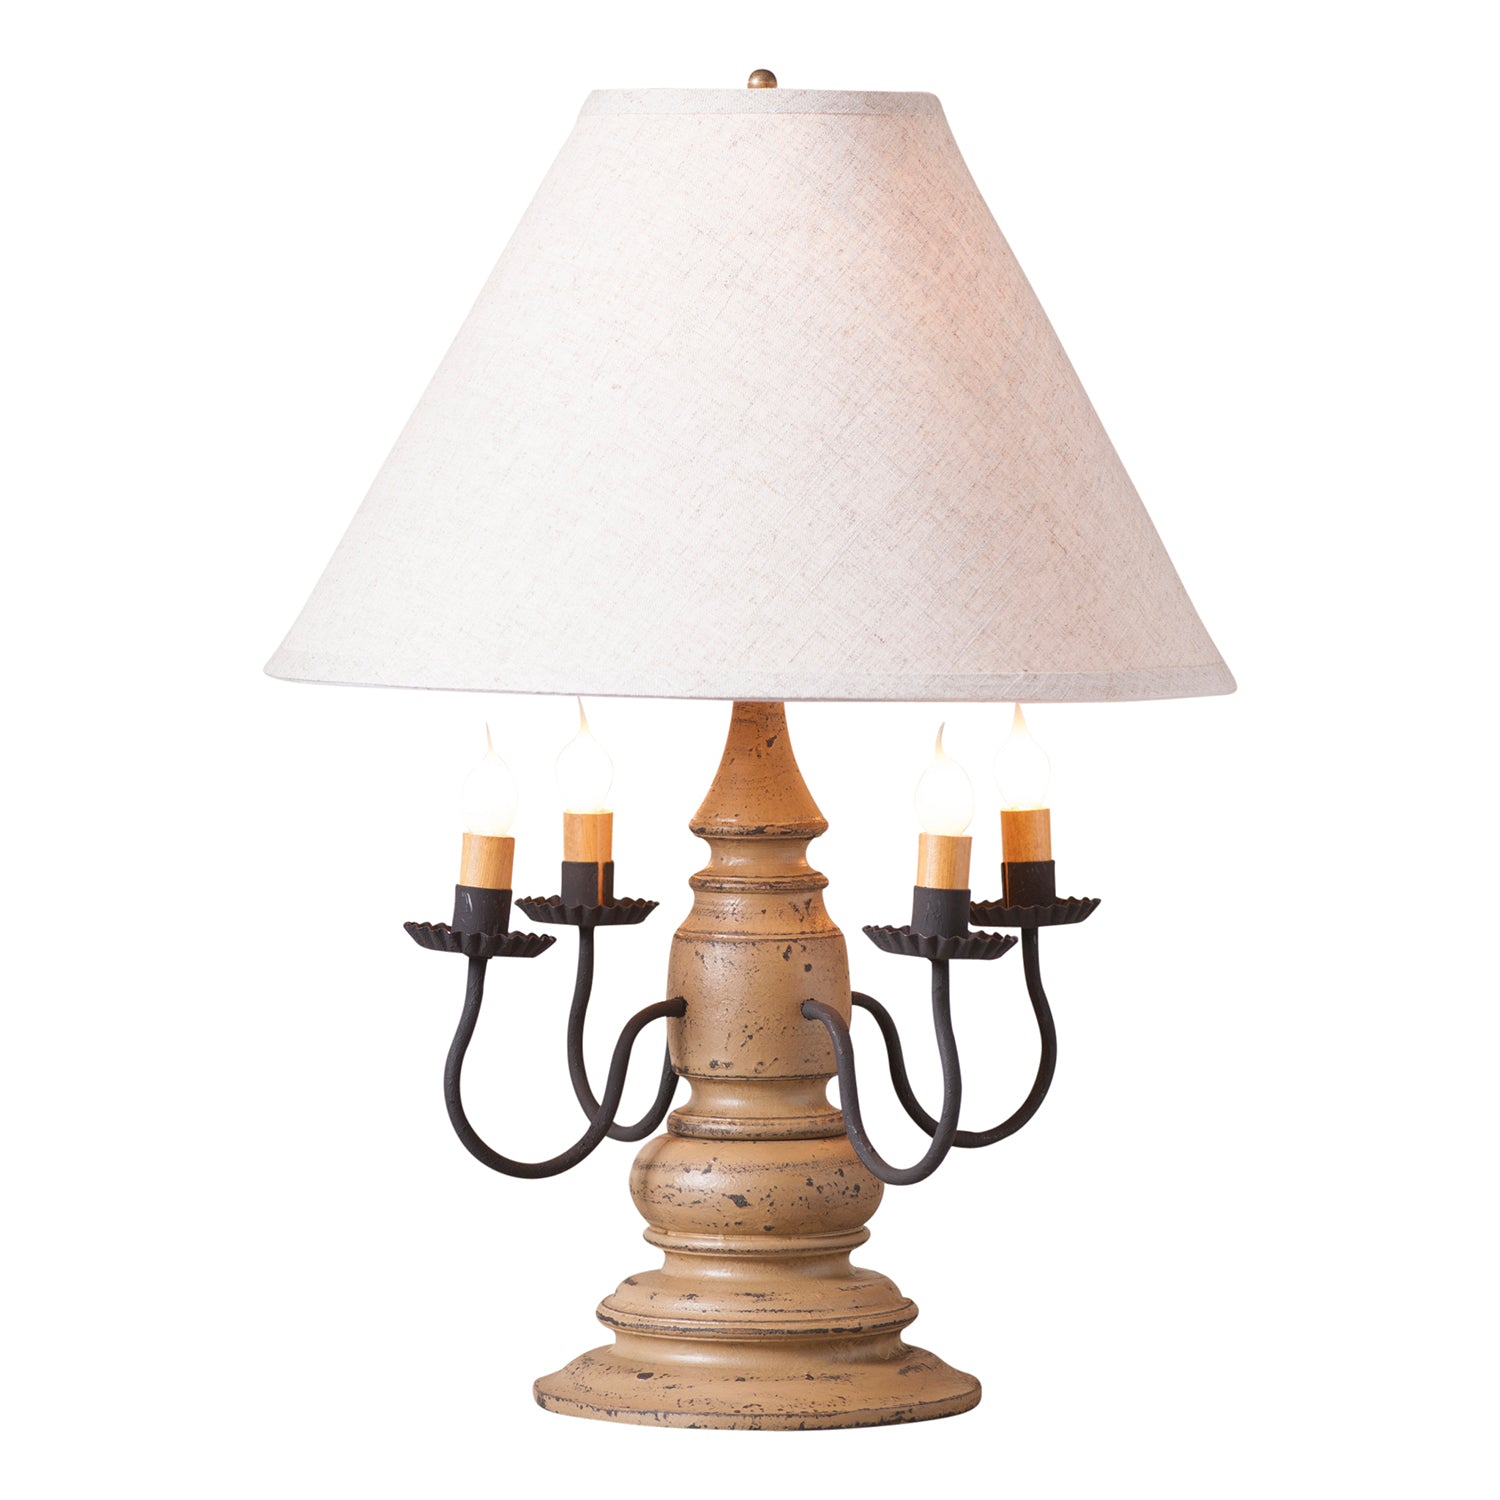 Harrison Lamp in Americana Pearwood with Linen Ivory Shade